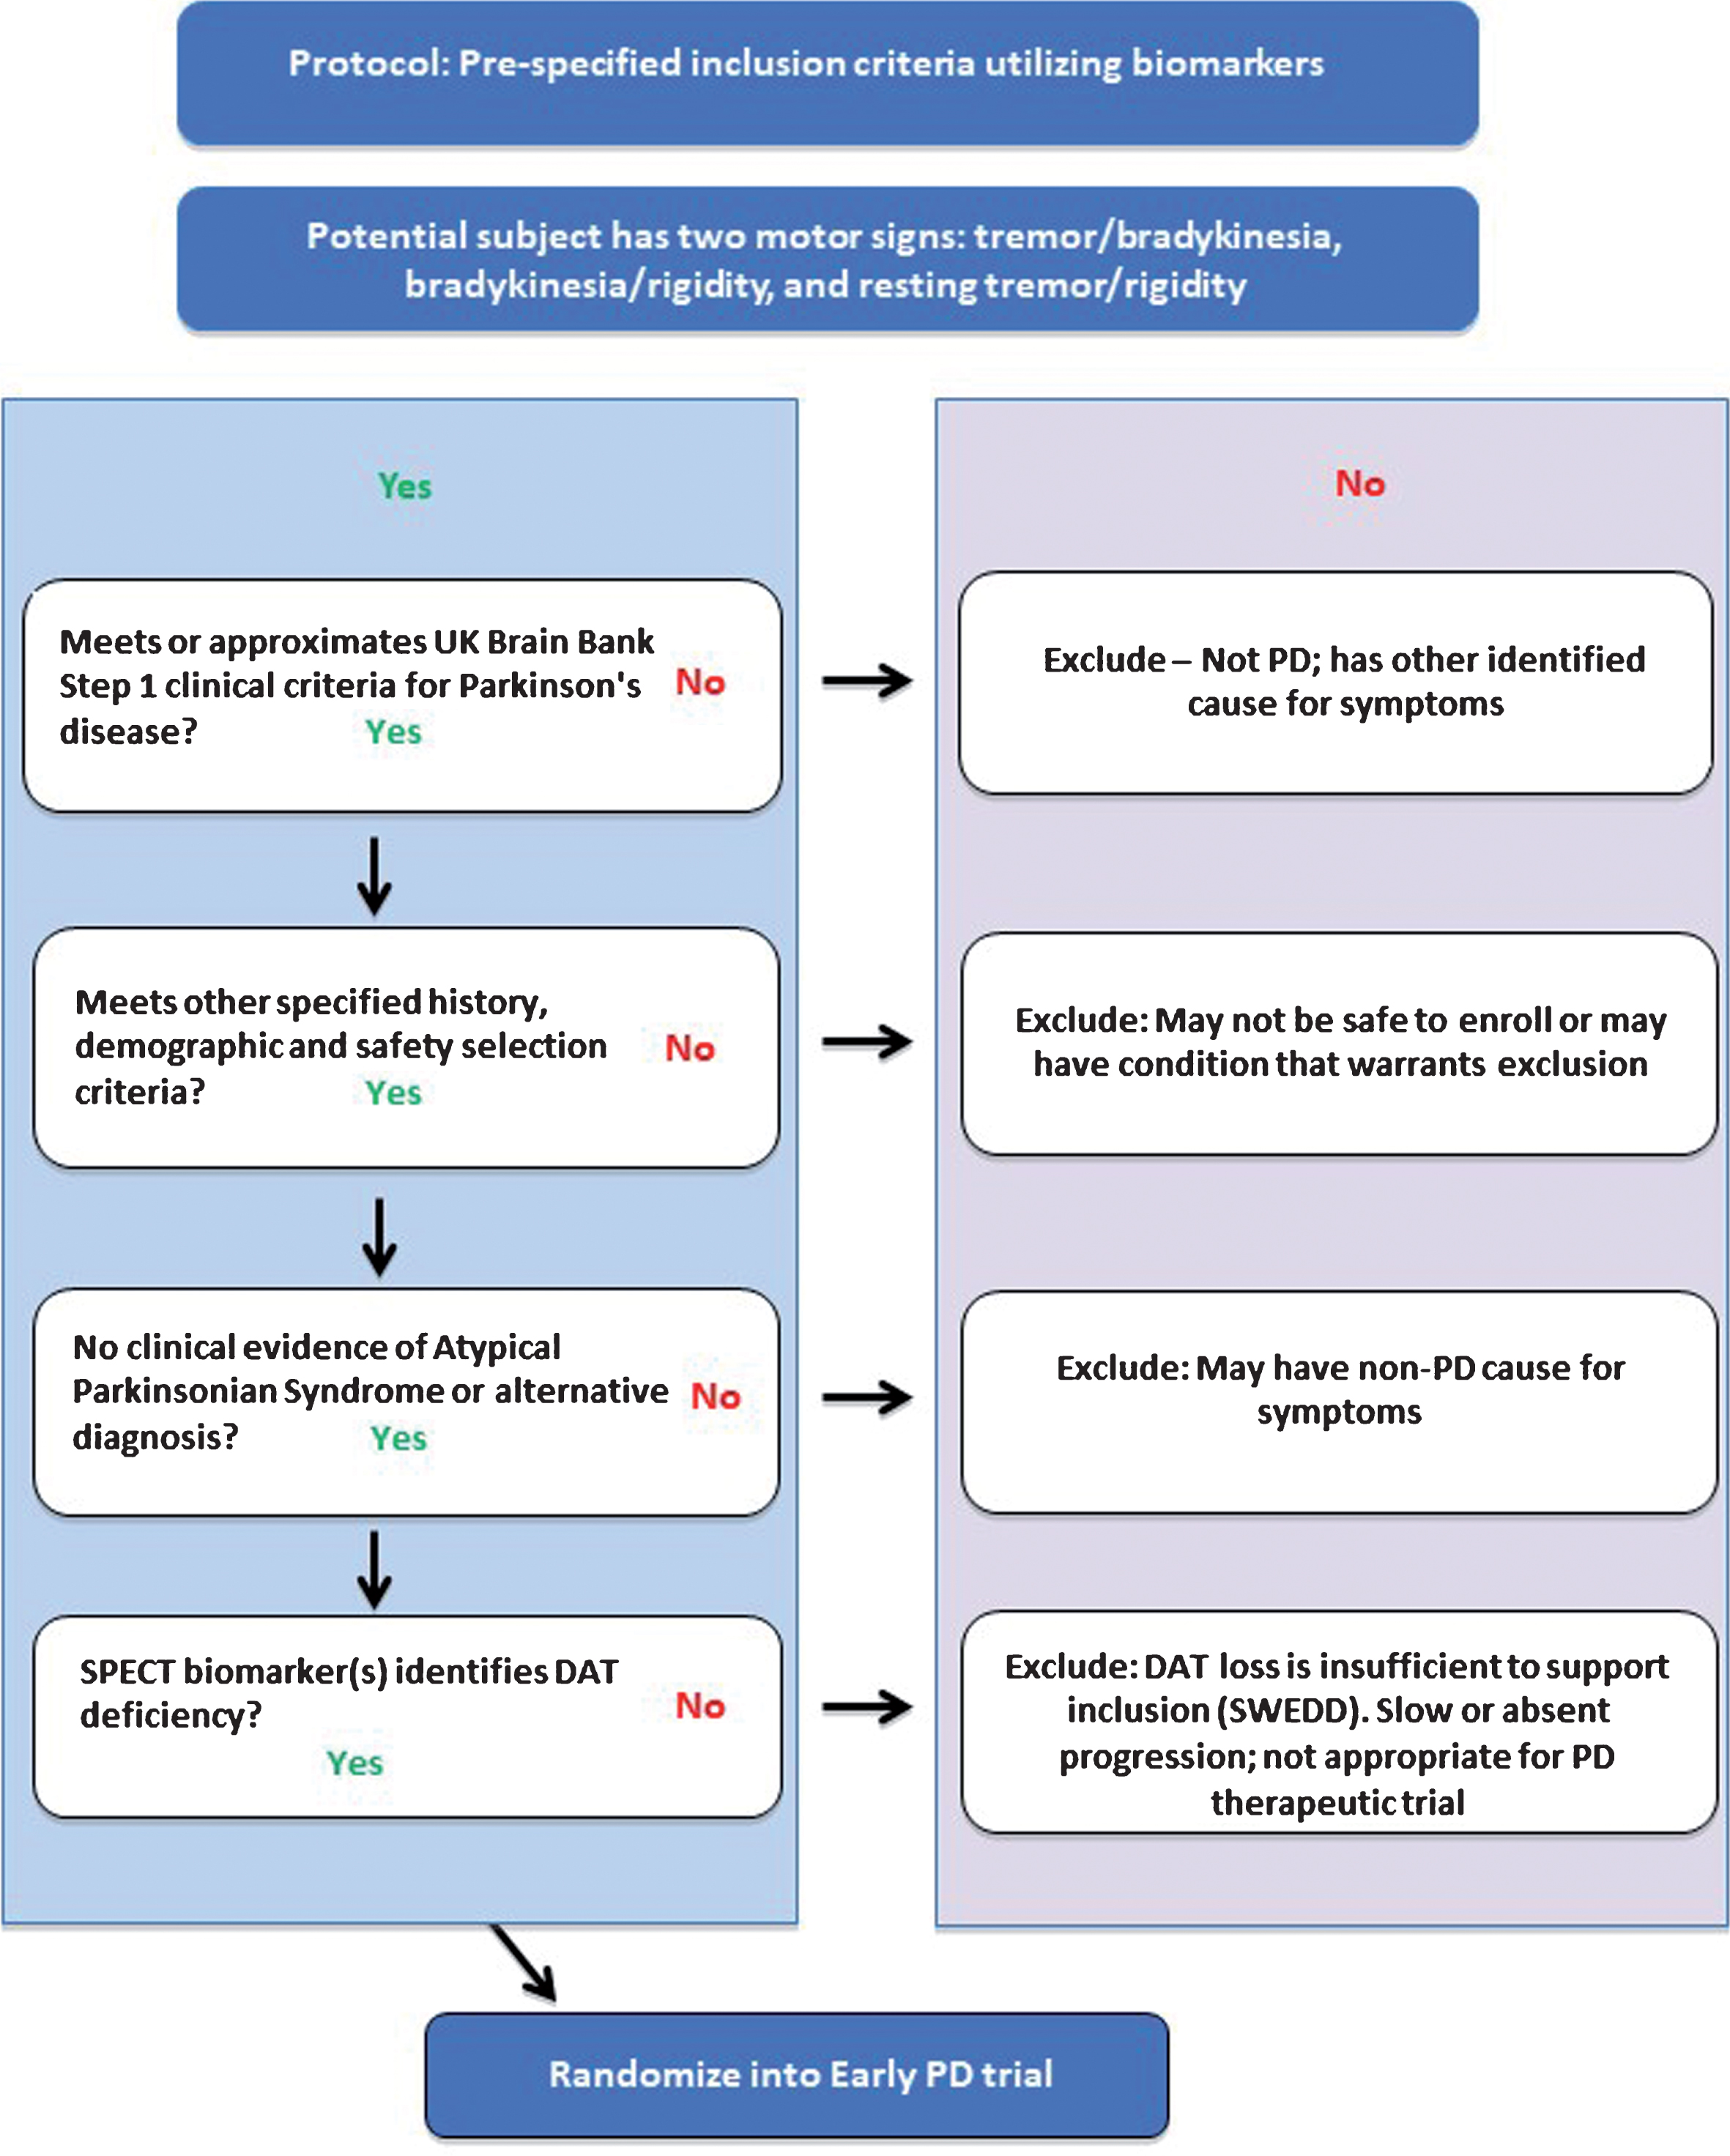 Proposed flow chart to apply DAT imaging as an enrichment biomarker in clinical trials targeting subjects with motor signs of early PD. Each of the four inclusion criteria / steps must be met for subjects to be successfully enrolled into the PD clinical trial. The clinical criteria must be met before subjects undergo DAT SPECT imaging (final step).